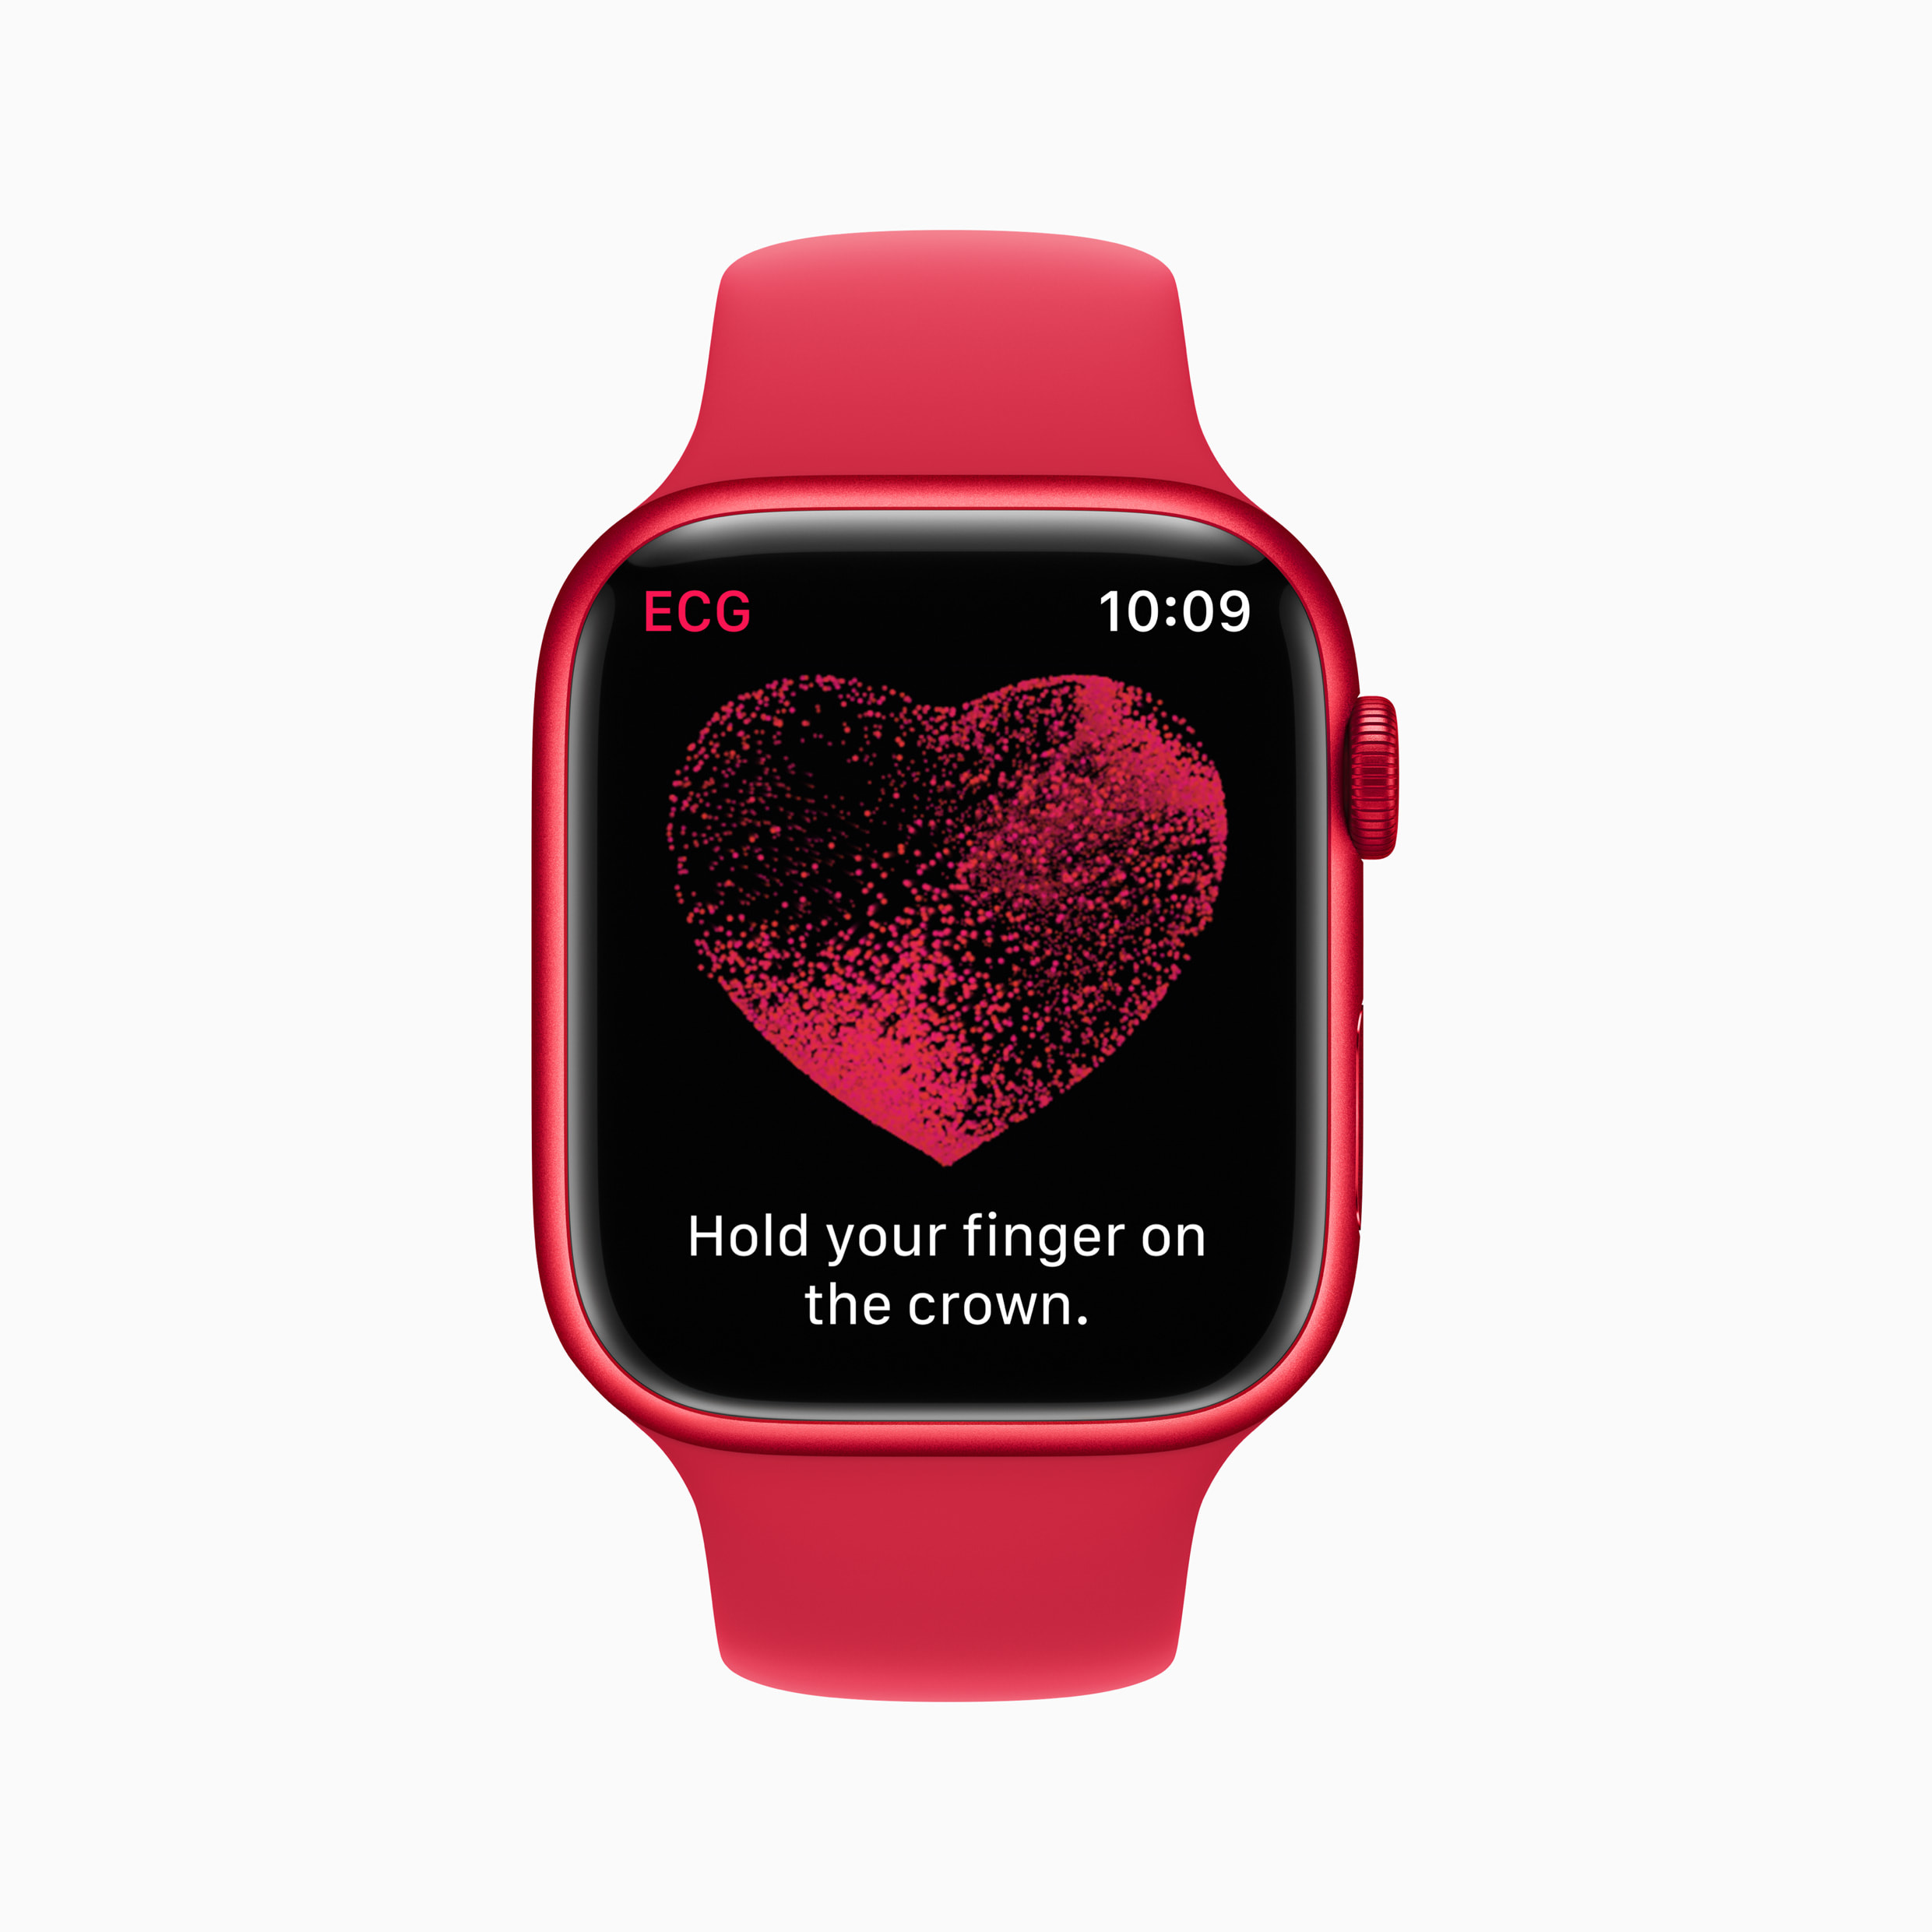 Apple health tech updates: AliveCor sues over Watch ECG, new blood pressure  monitoring patent and Fitness+ launch plans